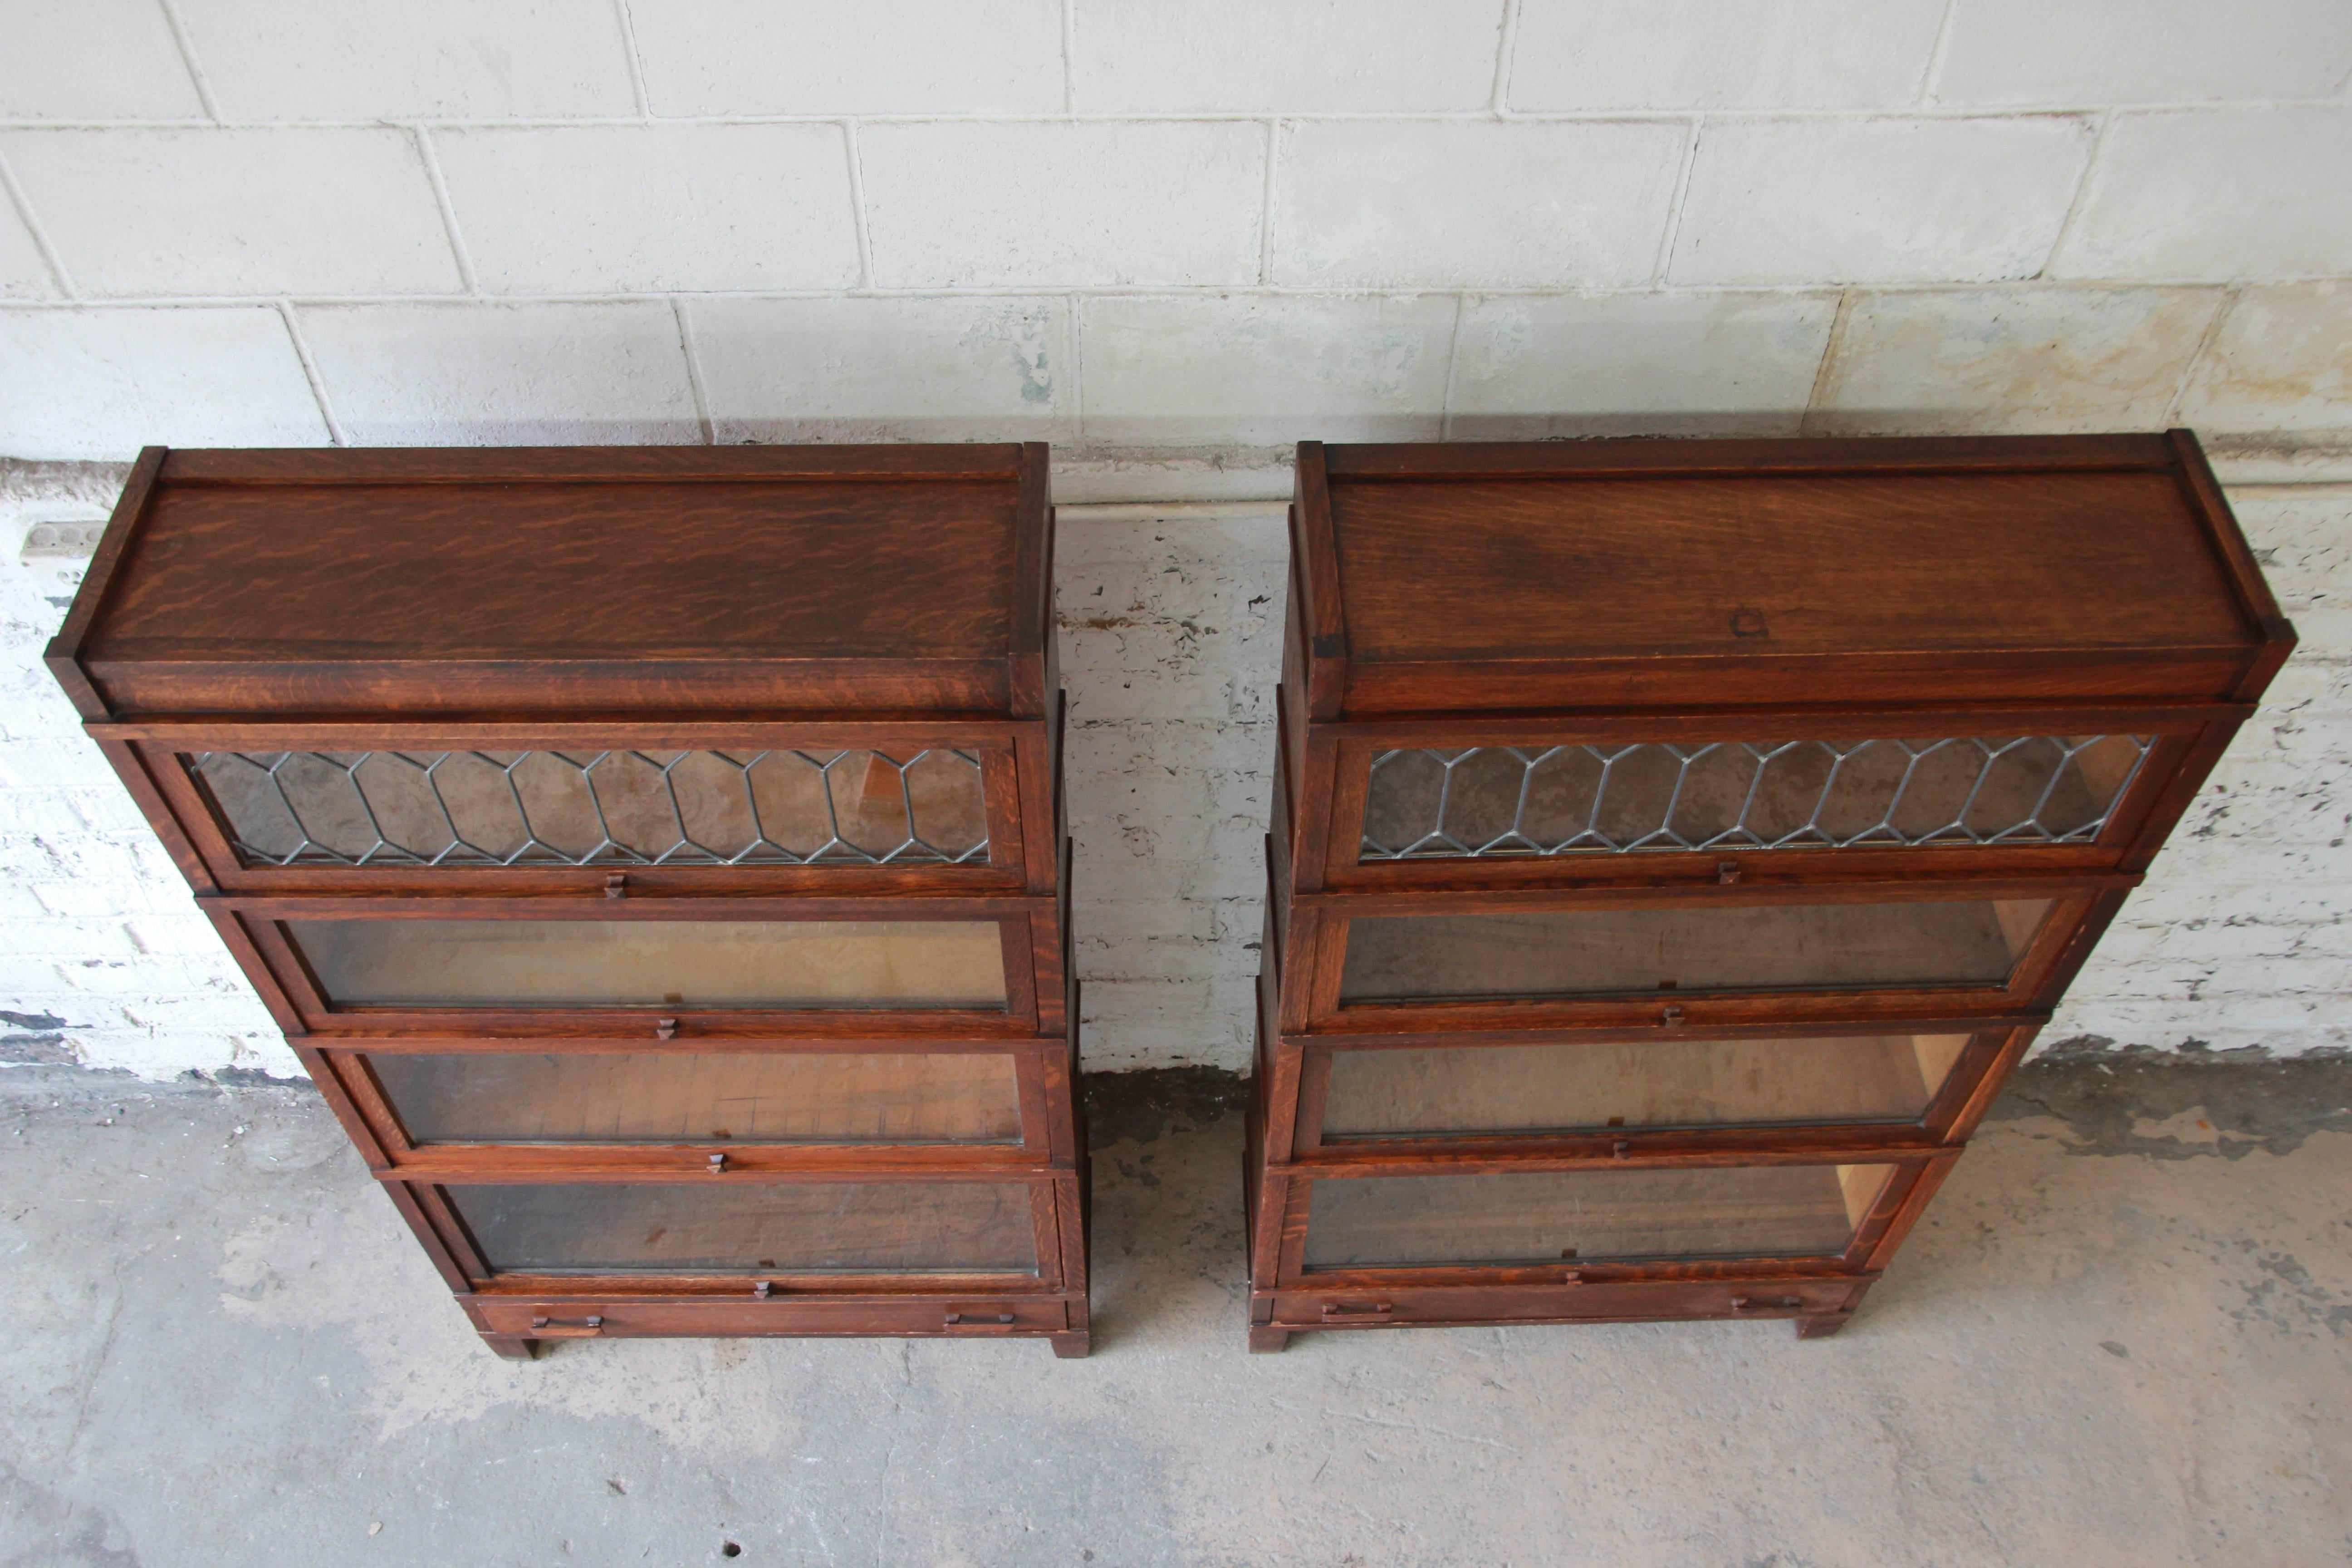 Arts and Crafts Antique Oak Barrister Bookcases with Leaded Glass Doors by Globe-Wernicke, Pair